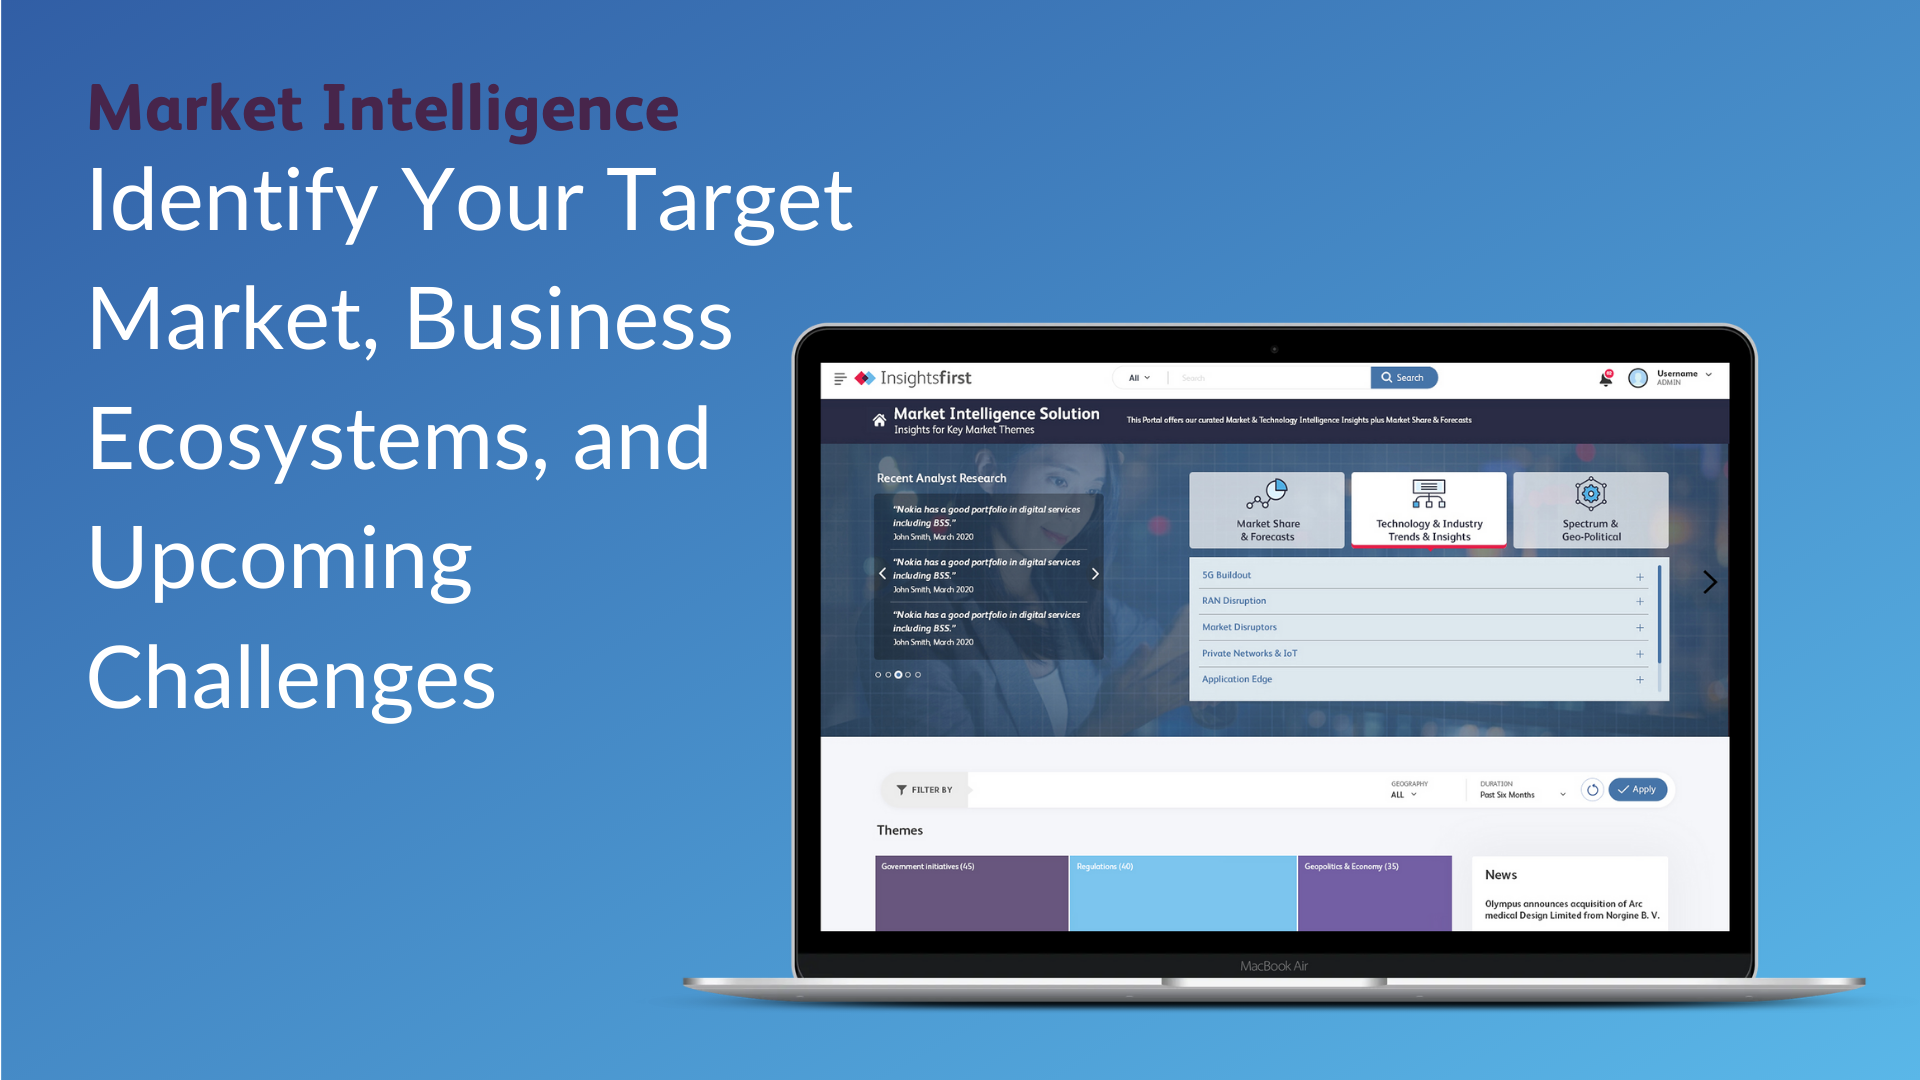 Market Intelligence: Identify Your Target Market, Business Ecosystems, and Upcoming Challenges